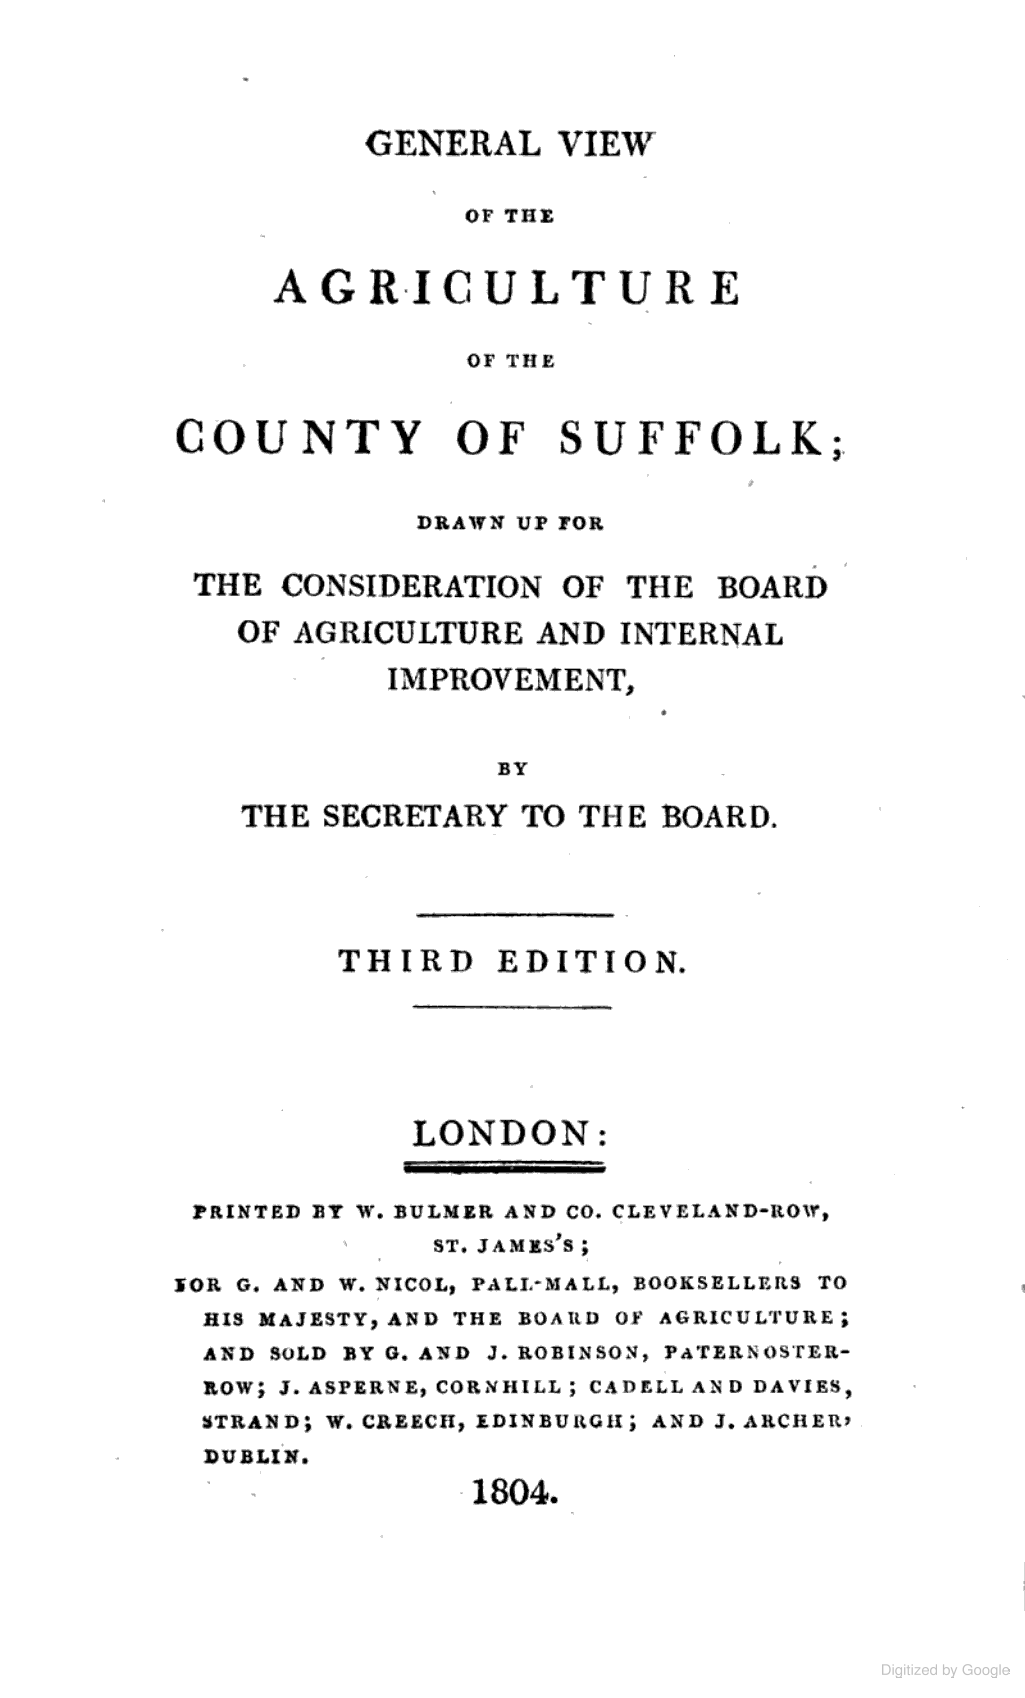 General view of the agriculture of the county of Suffolk cover